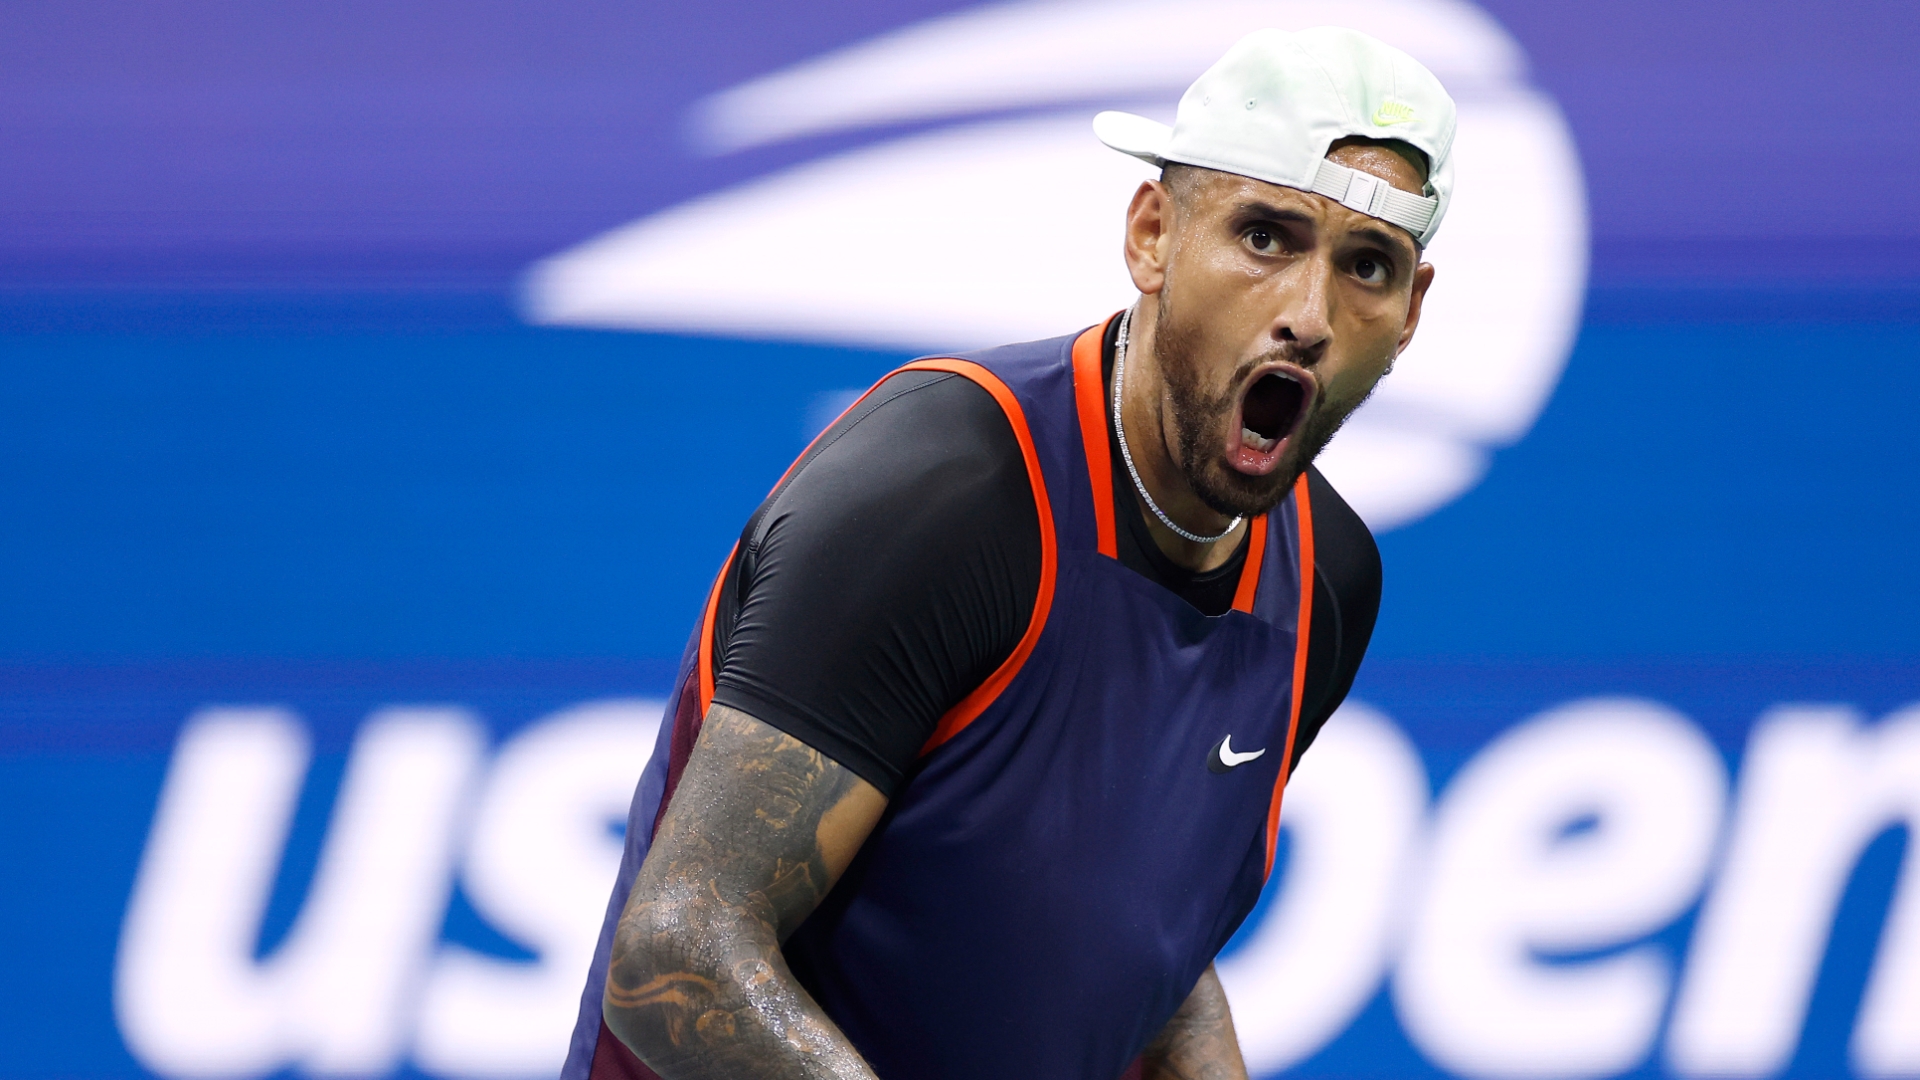 Nick Kyrgios upsets Daniil Medvedev with dominant four-set win - Stream the Video